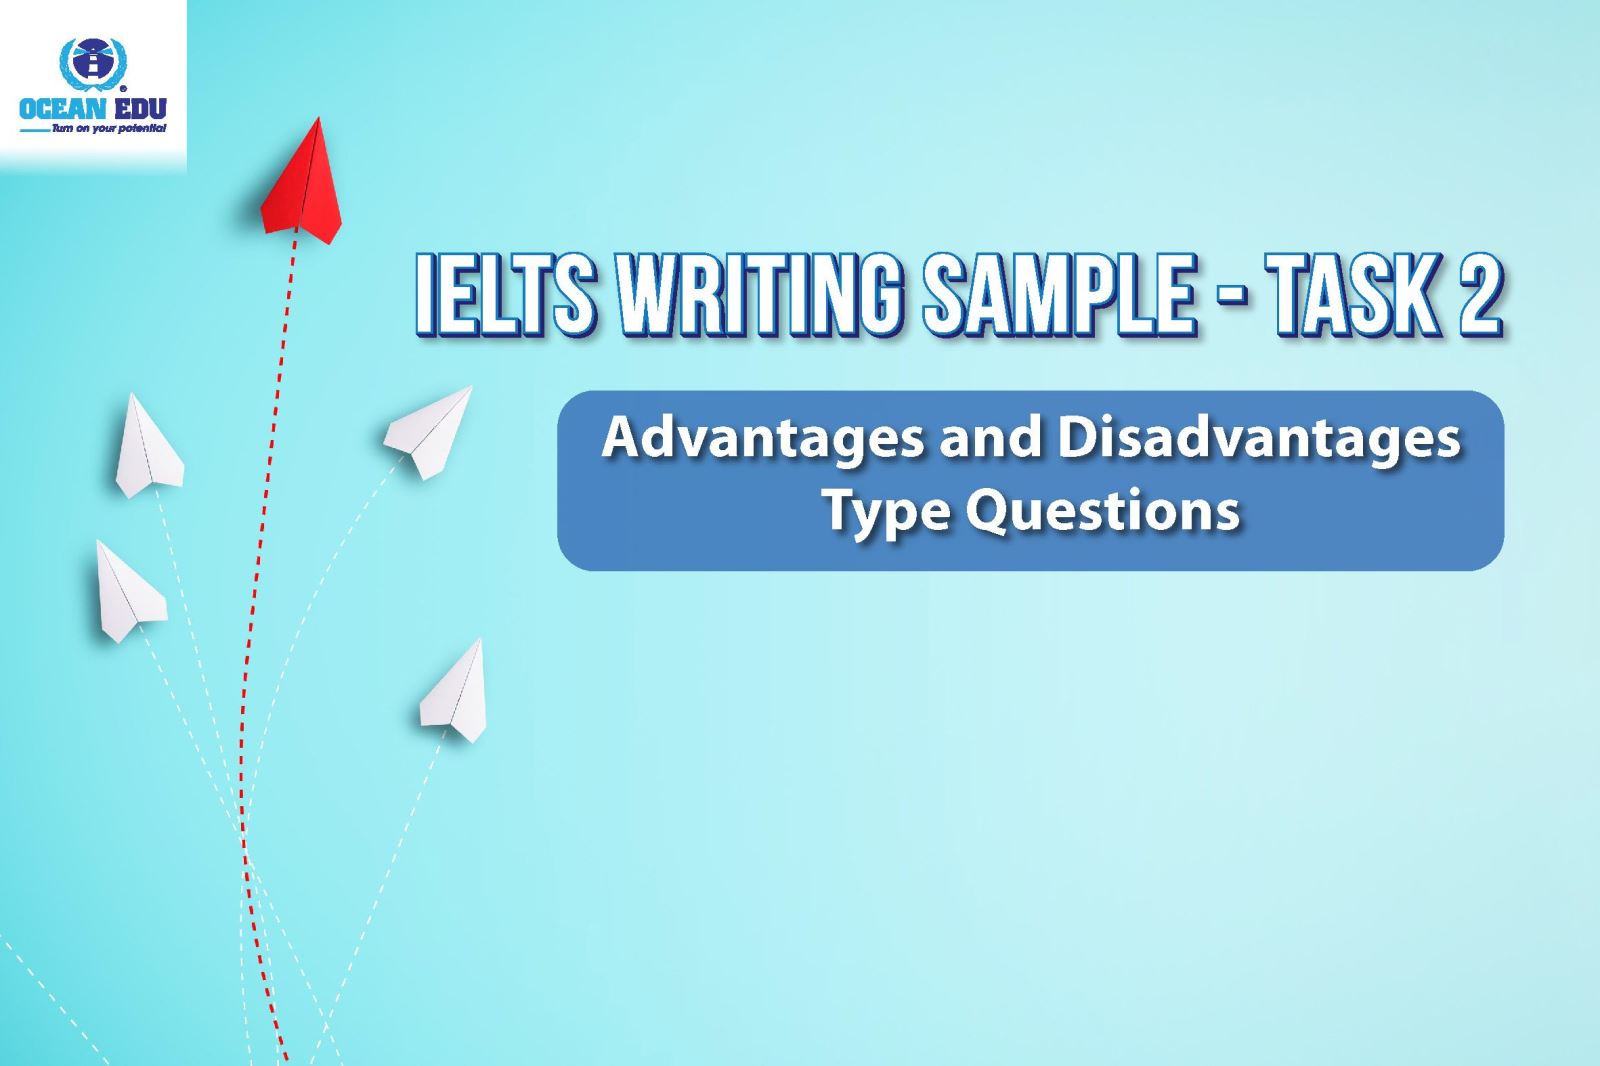 IELTS Writing Sample - Advantages and Disadvantages Type Questions